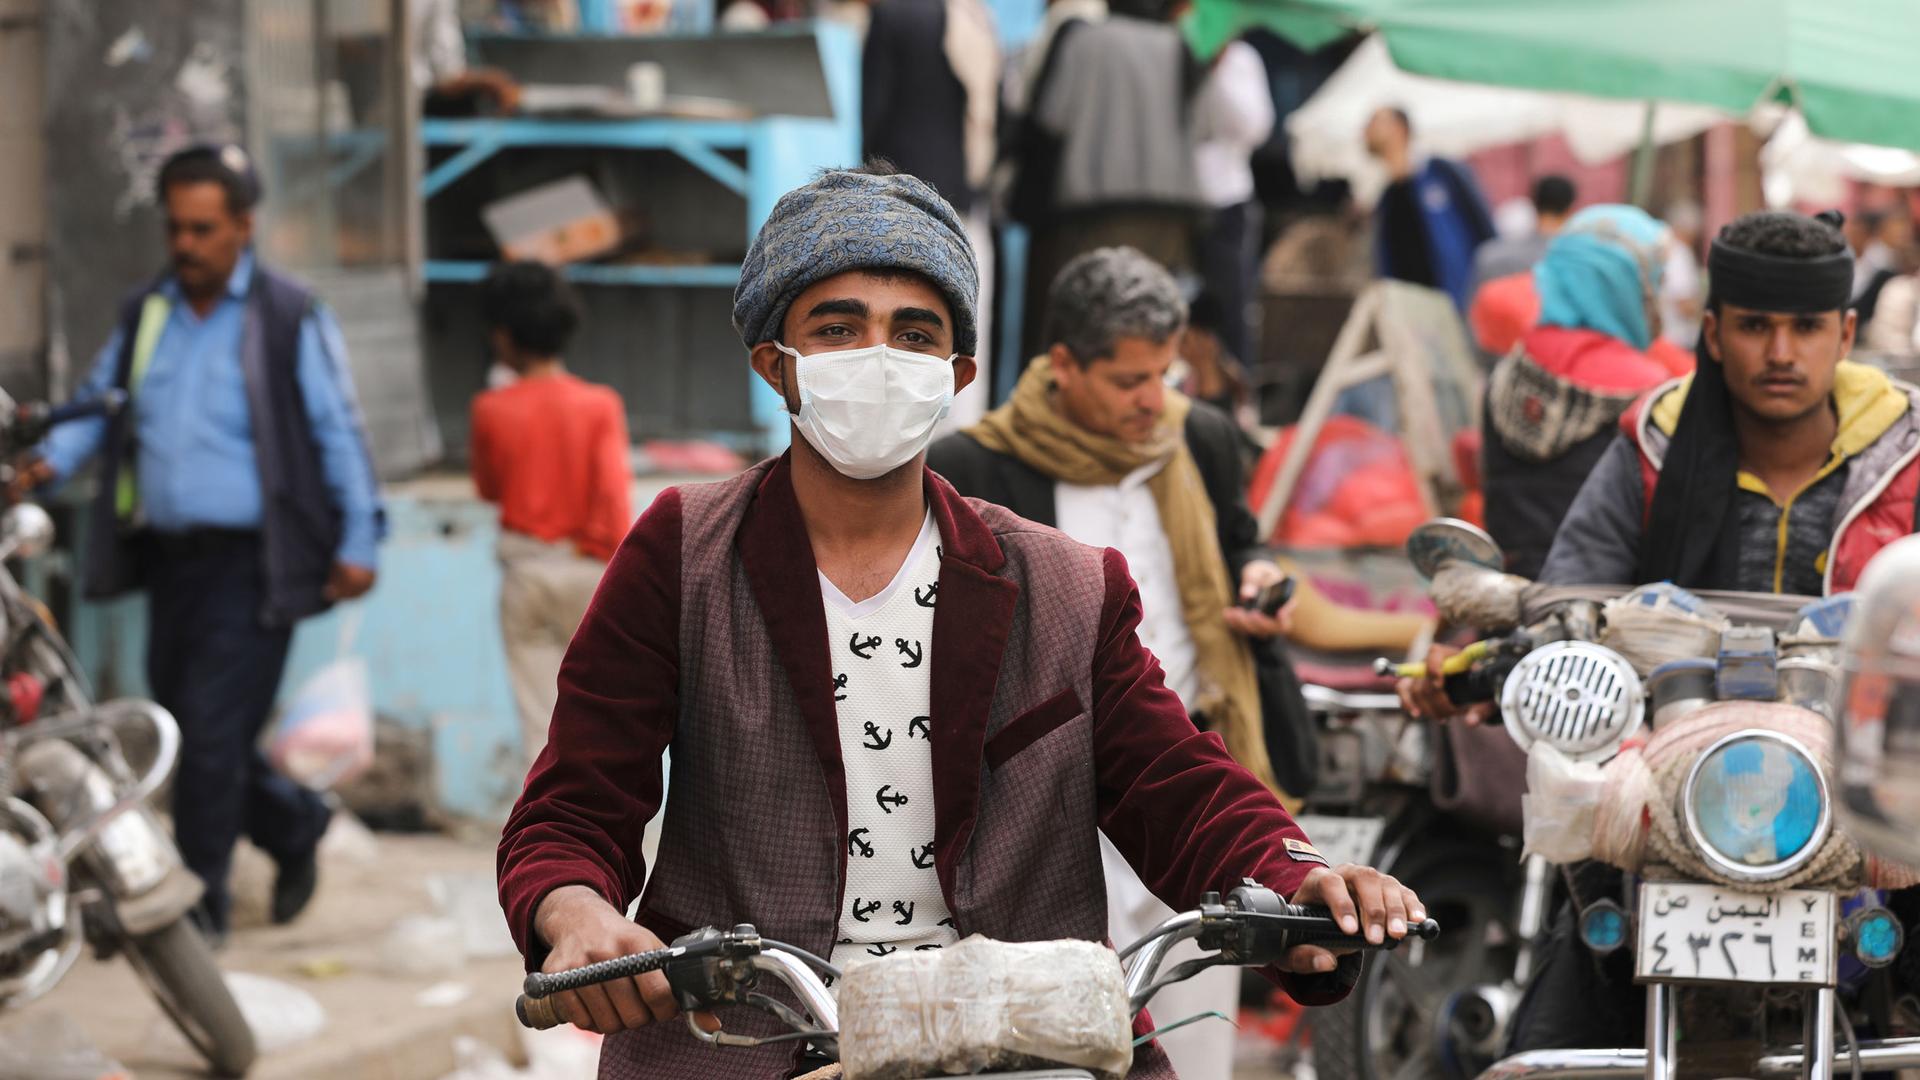 A man wears a protective face mask as he rides a motorcycle